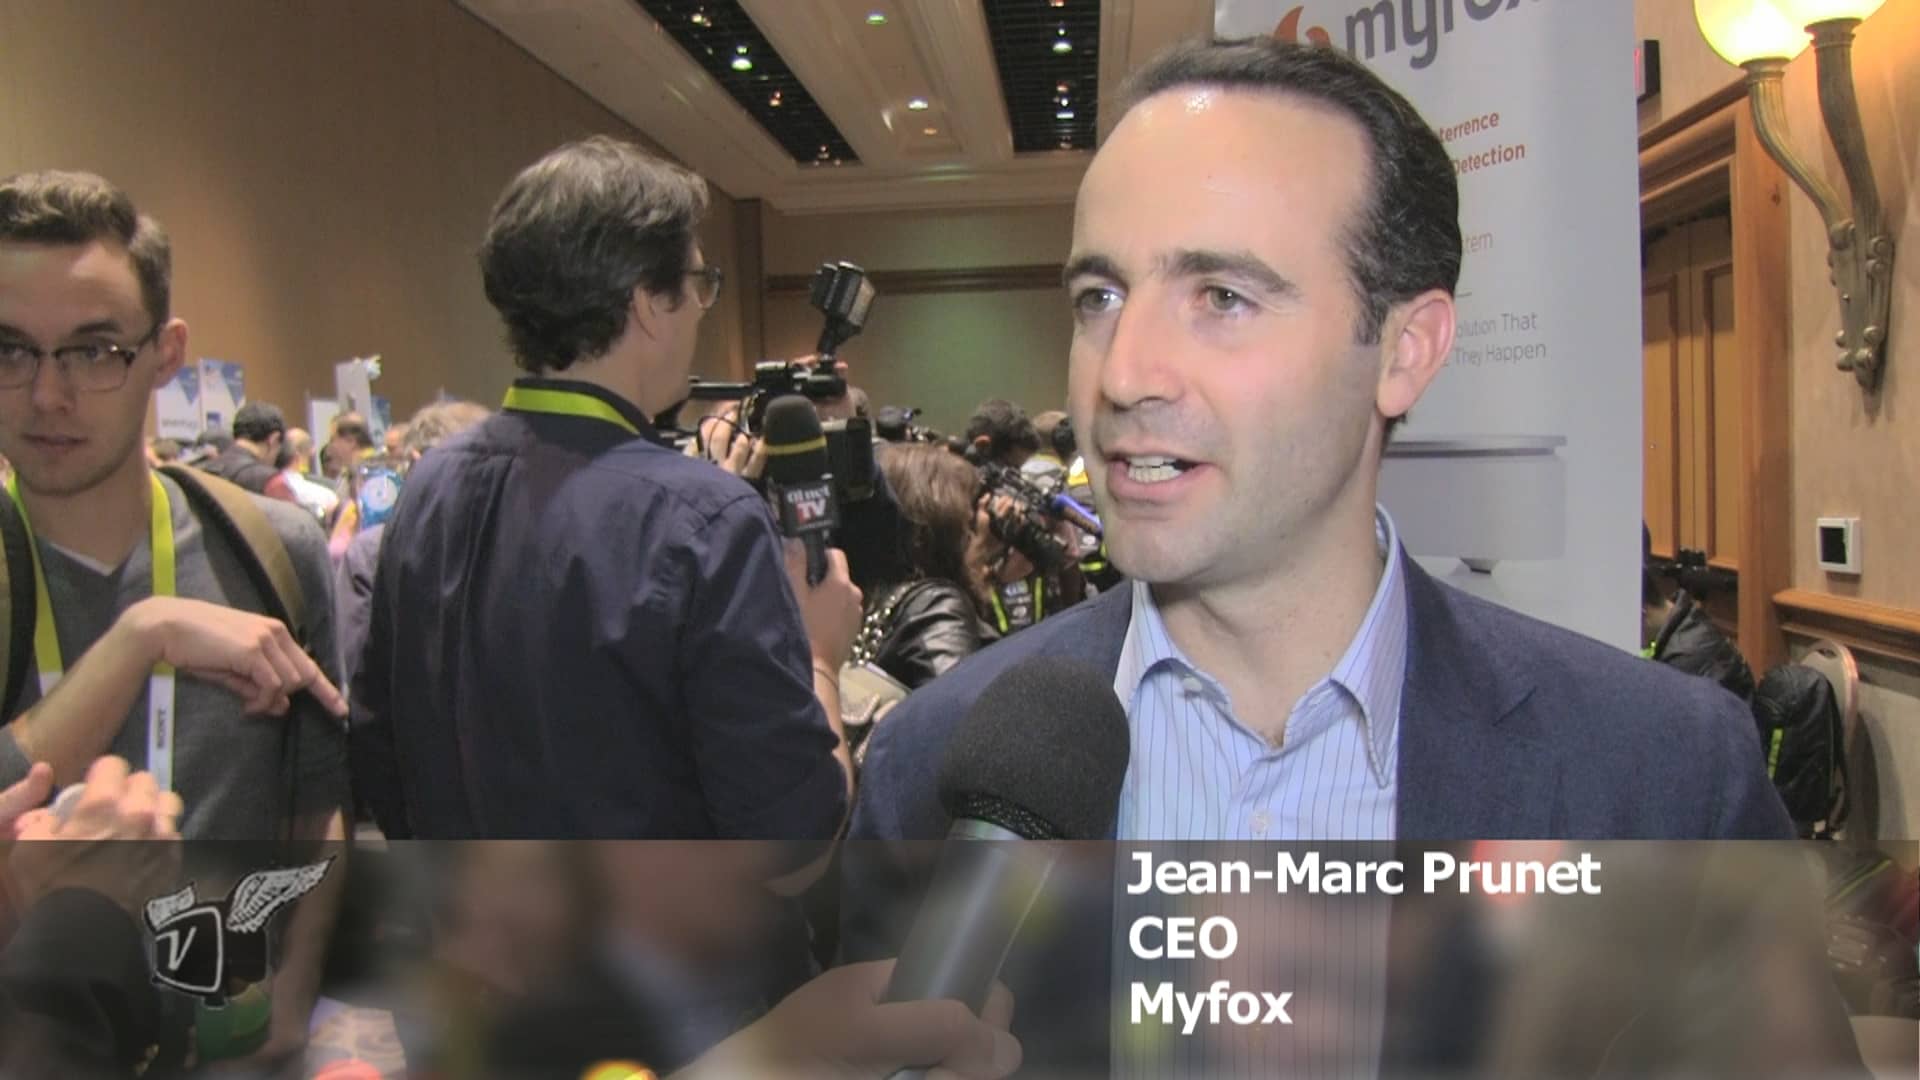 Jean-Marc Prunet discussing how his company, Myfox, can detect break-ins before they happen.